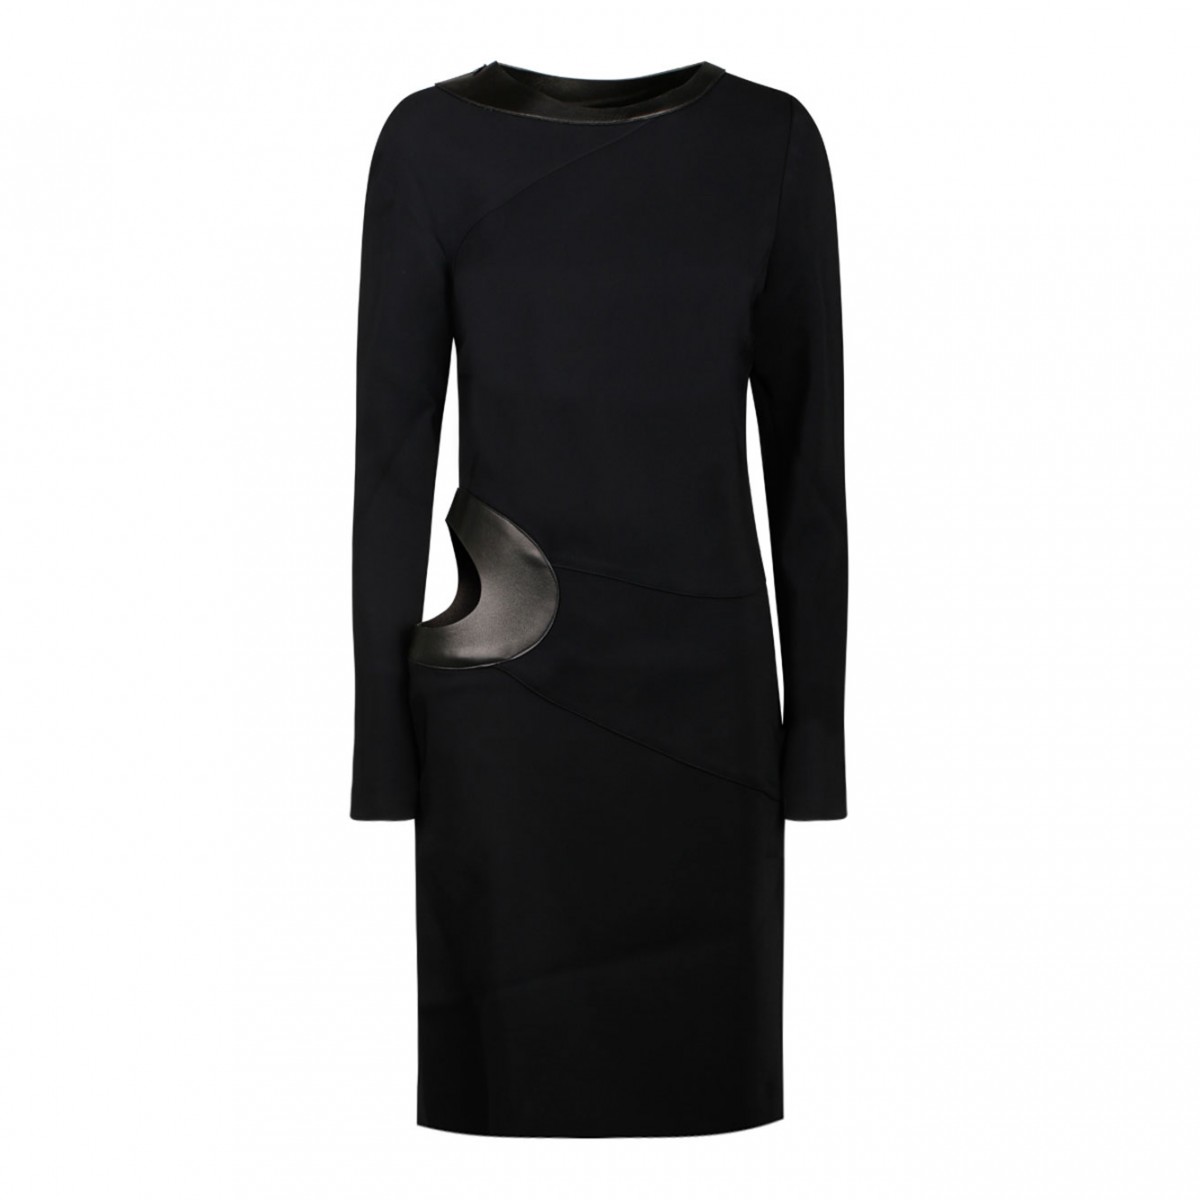 Tom Ford Black Leather Cut Out Long Sleeved Dress